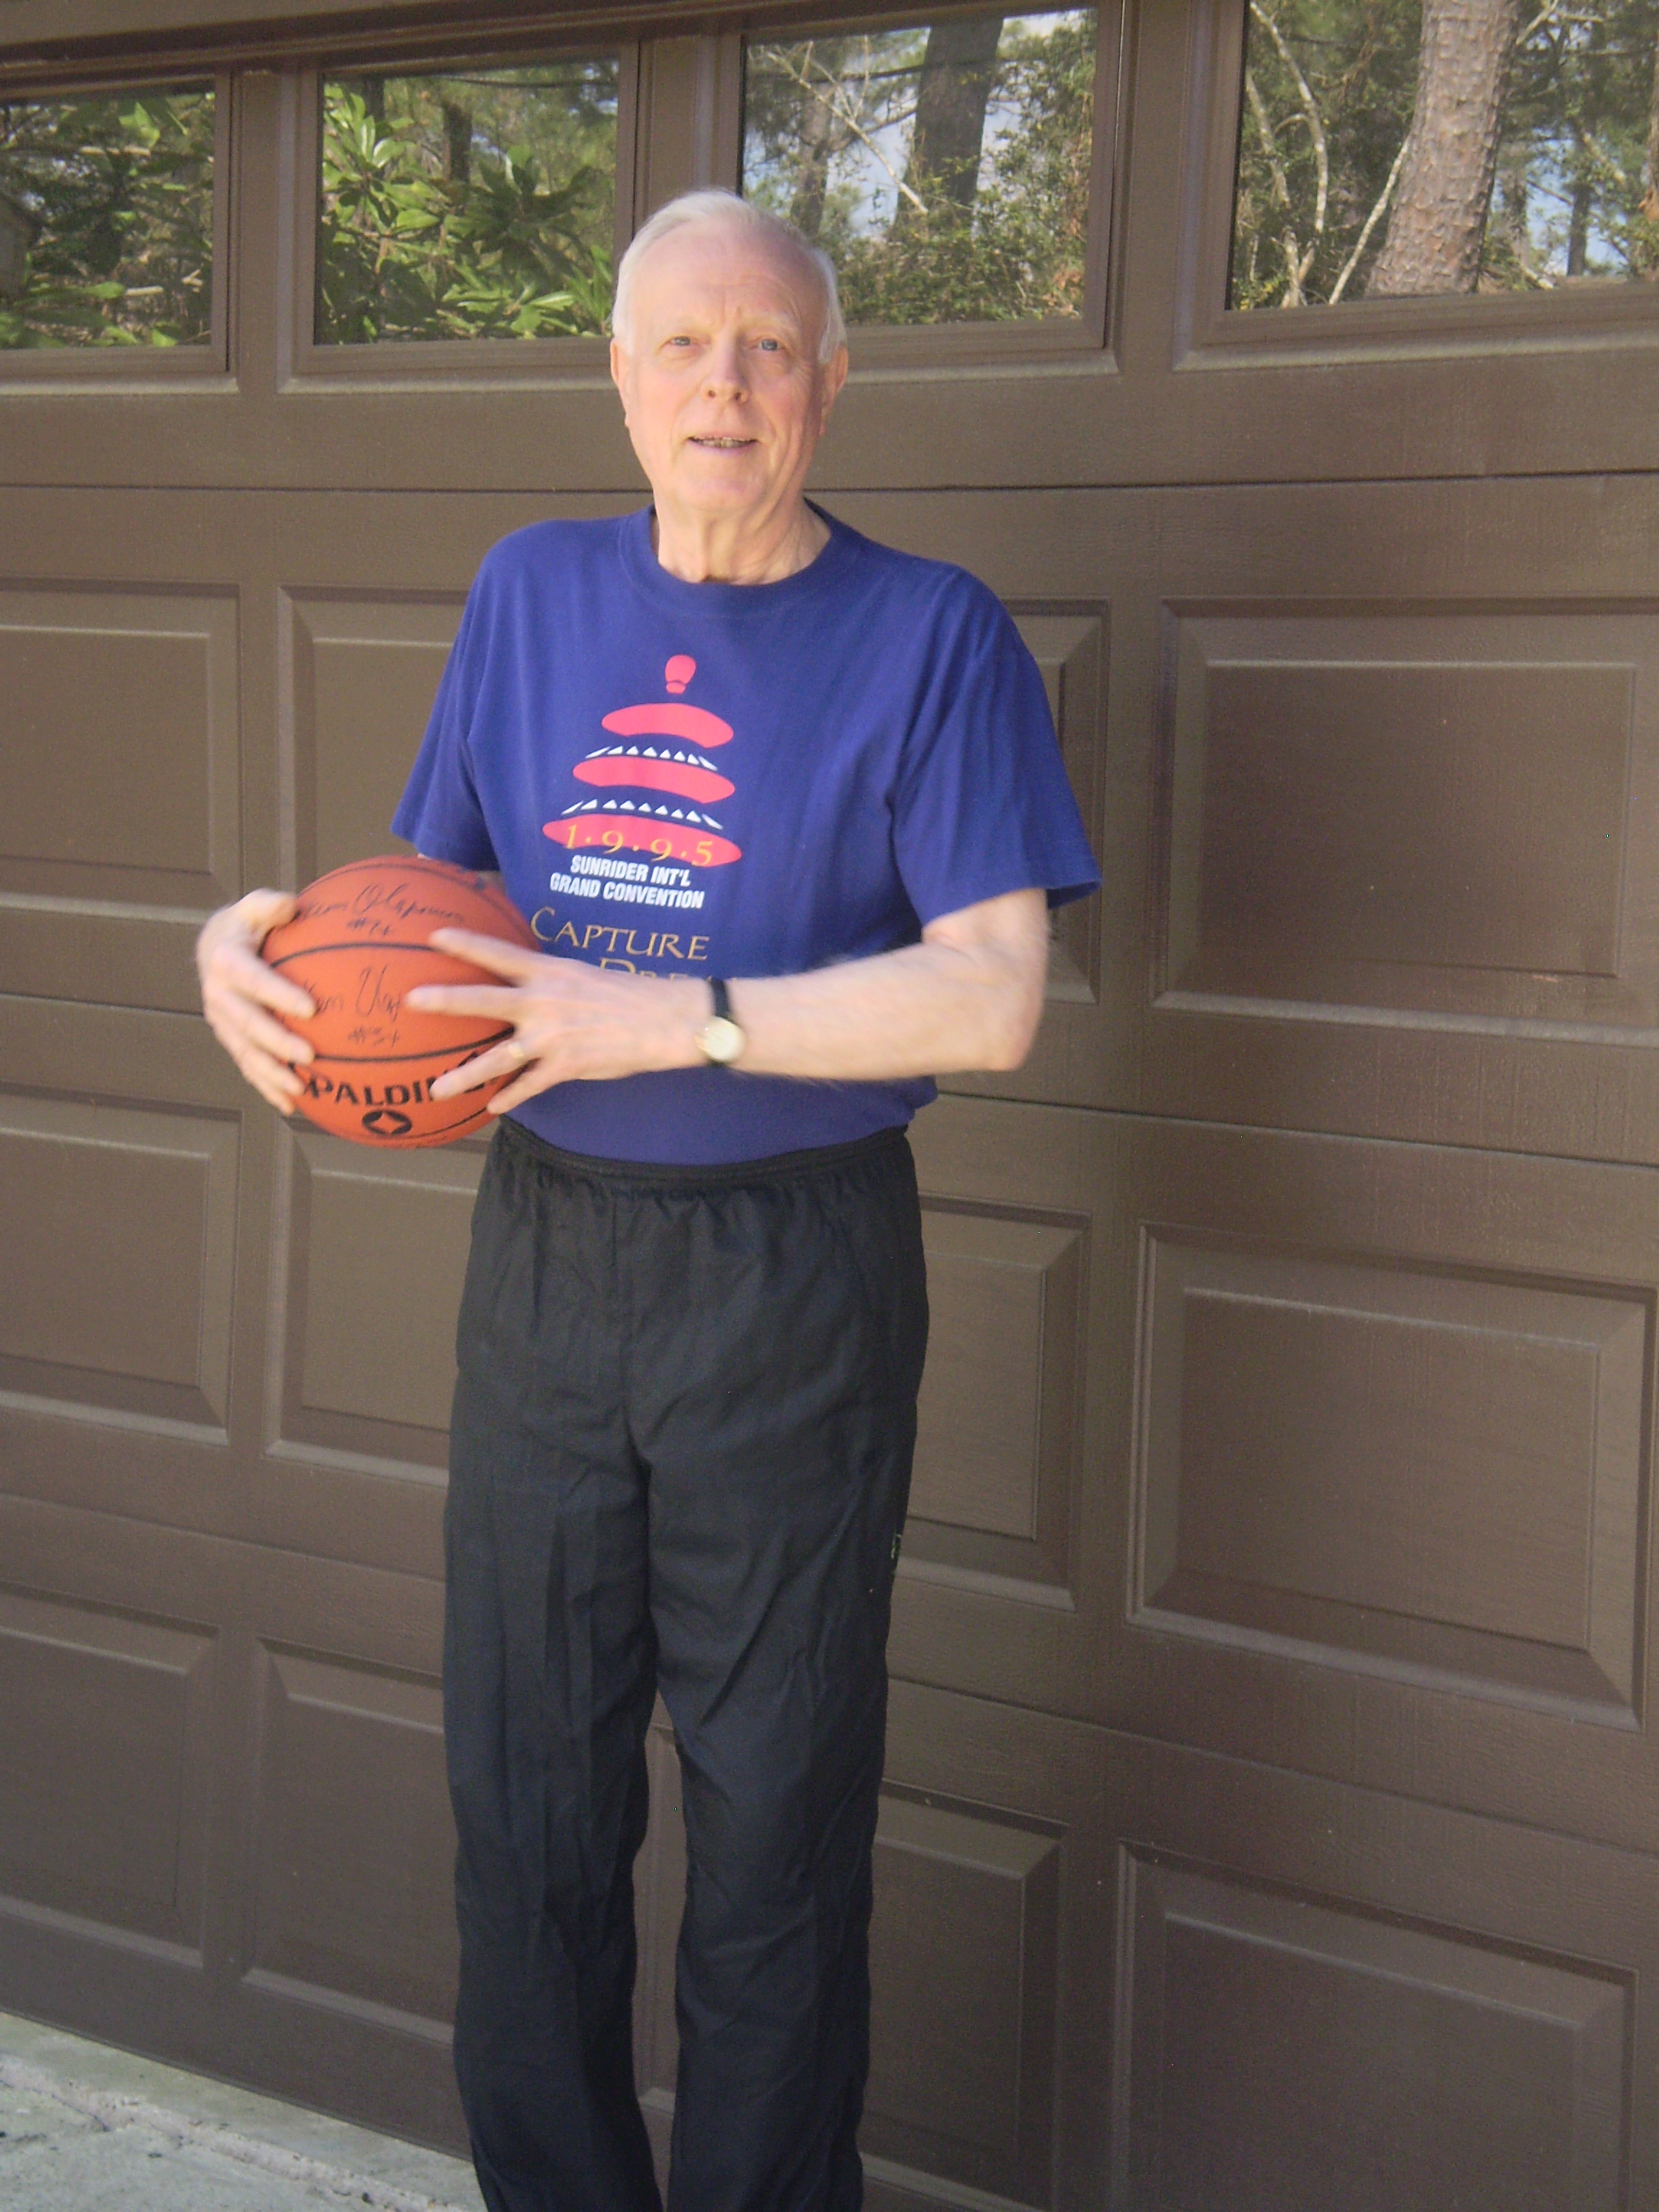 Bill dribbles on the court; not in drawers.